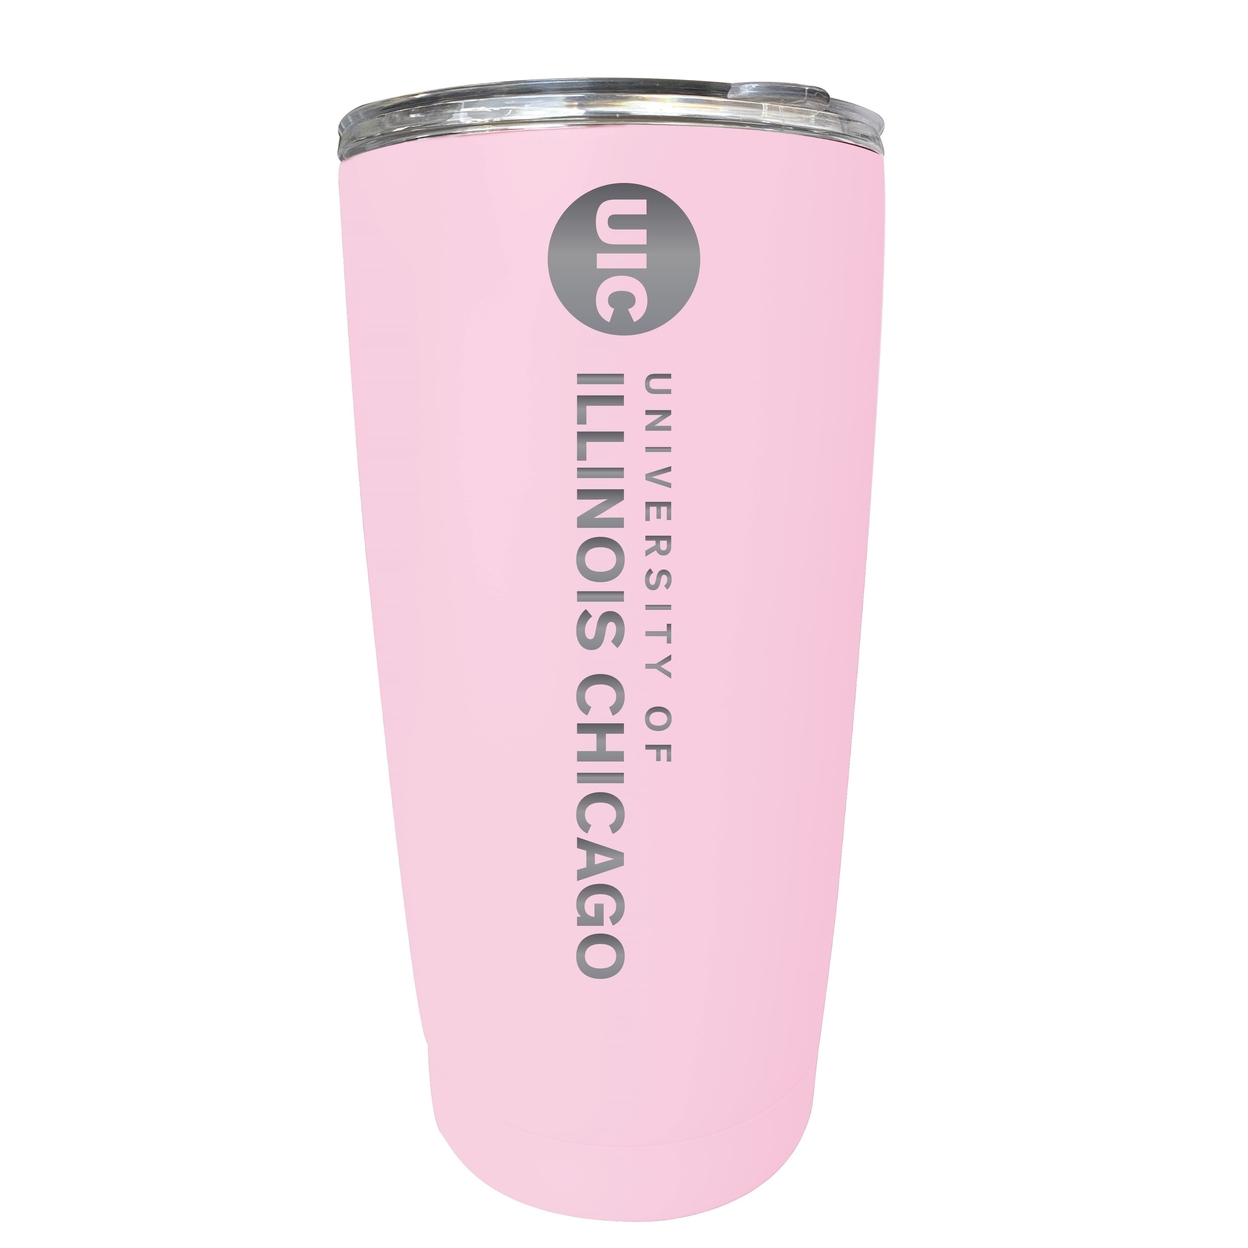 University Of Illinois At Chicago 16 Oz Stainless Steel Etched Tumbler - Choose Your Color - Pink